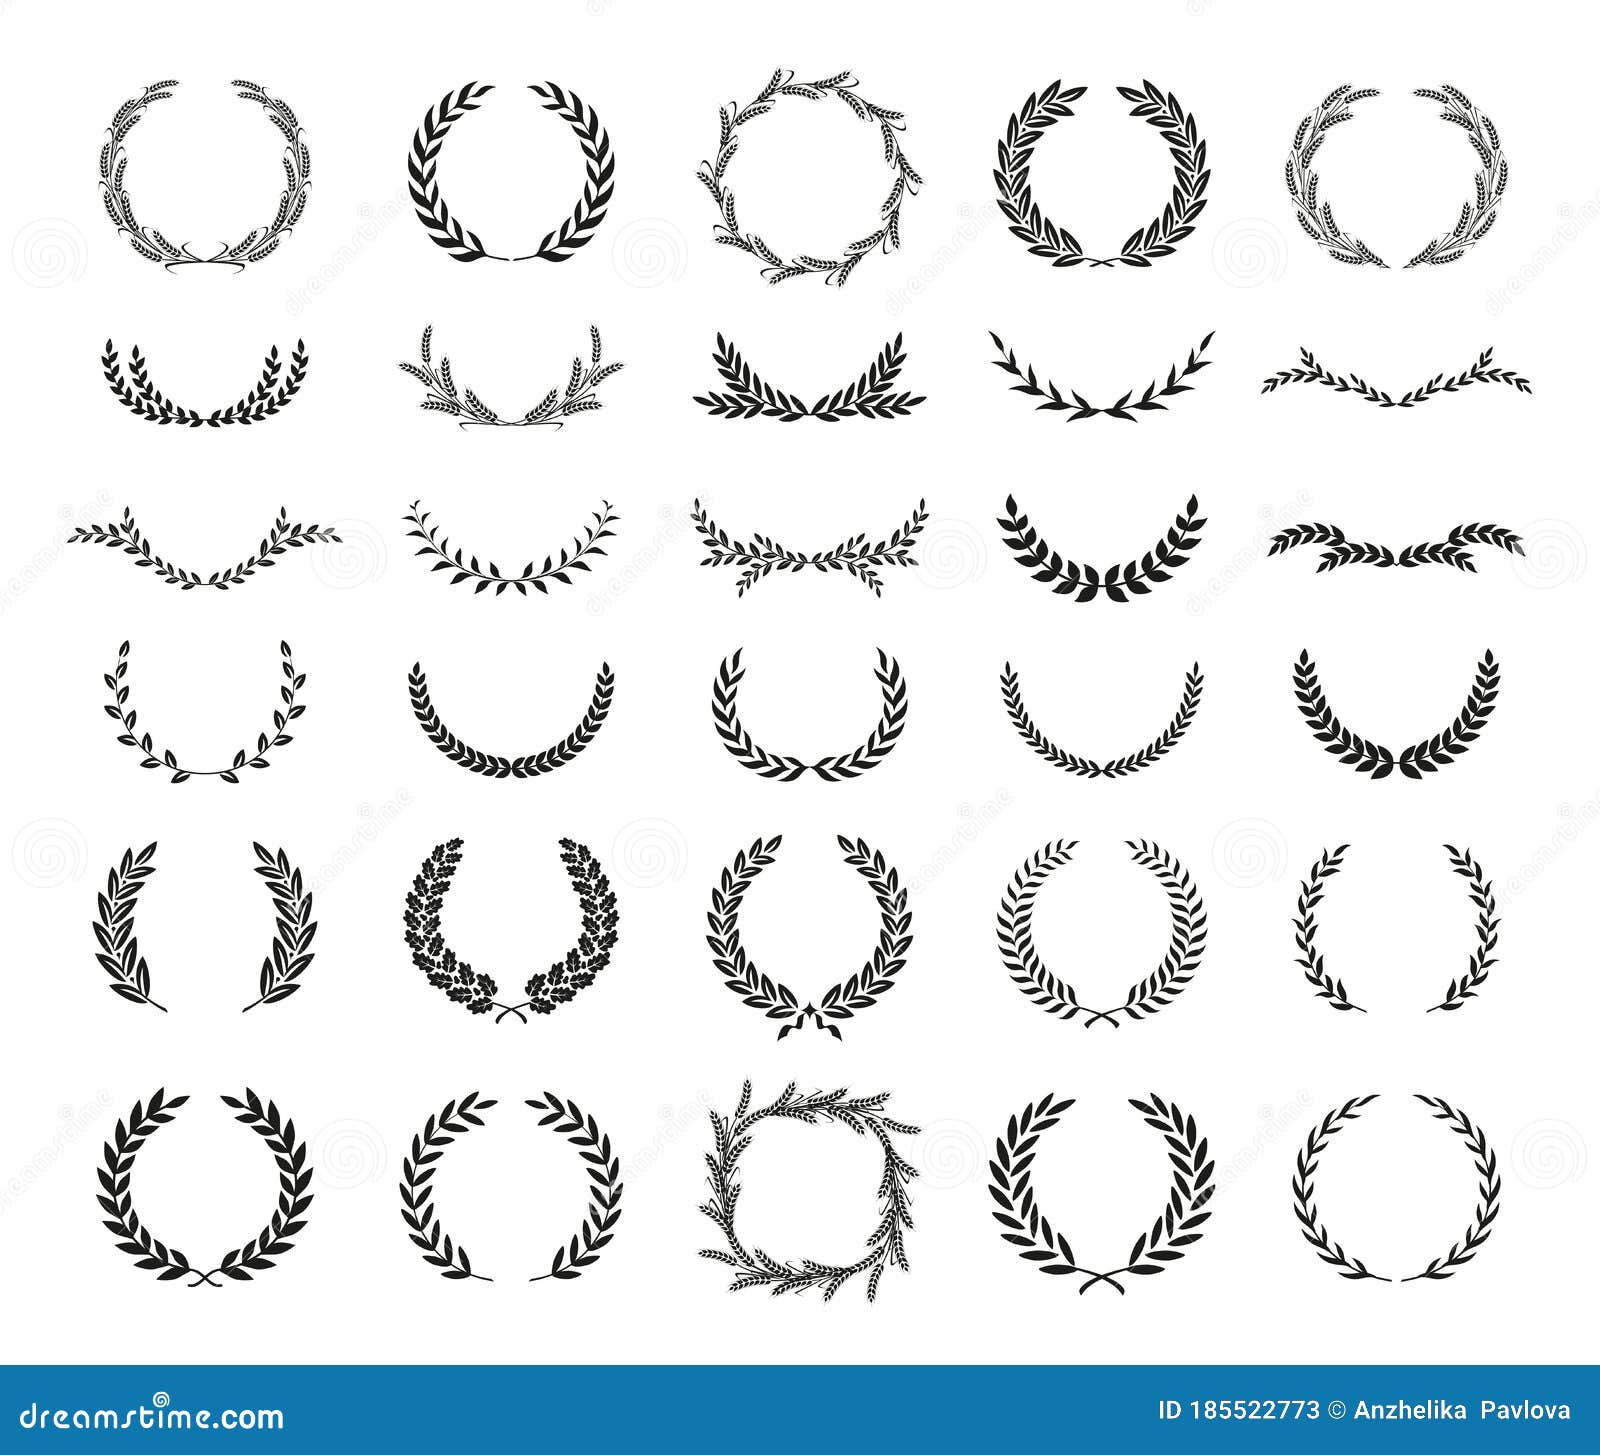 collection of different black and white silhouette circular laurel foliate, wheat and oak wreaths depicting an award, achievement